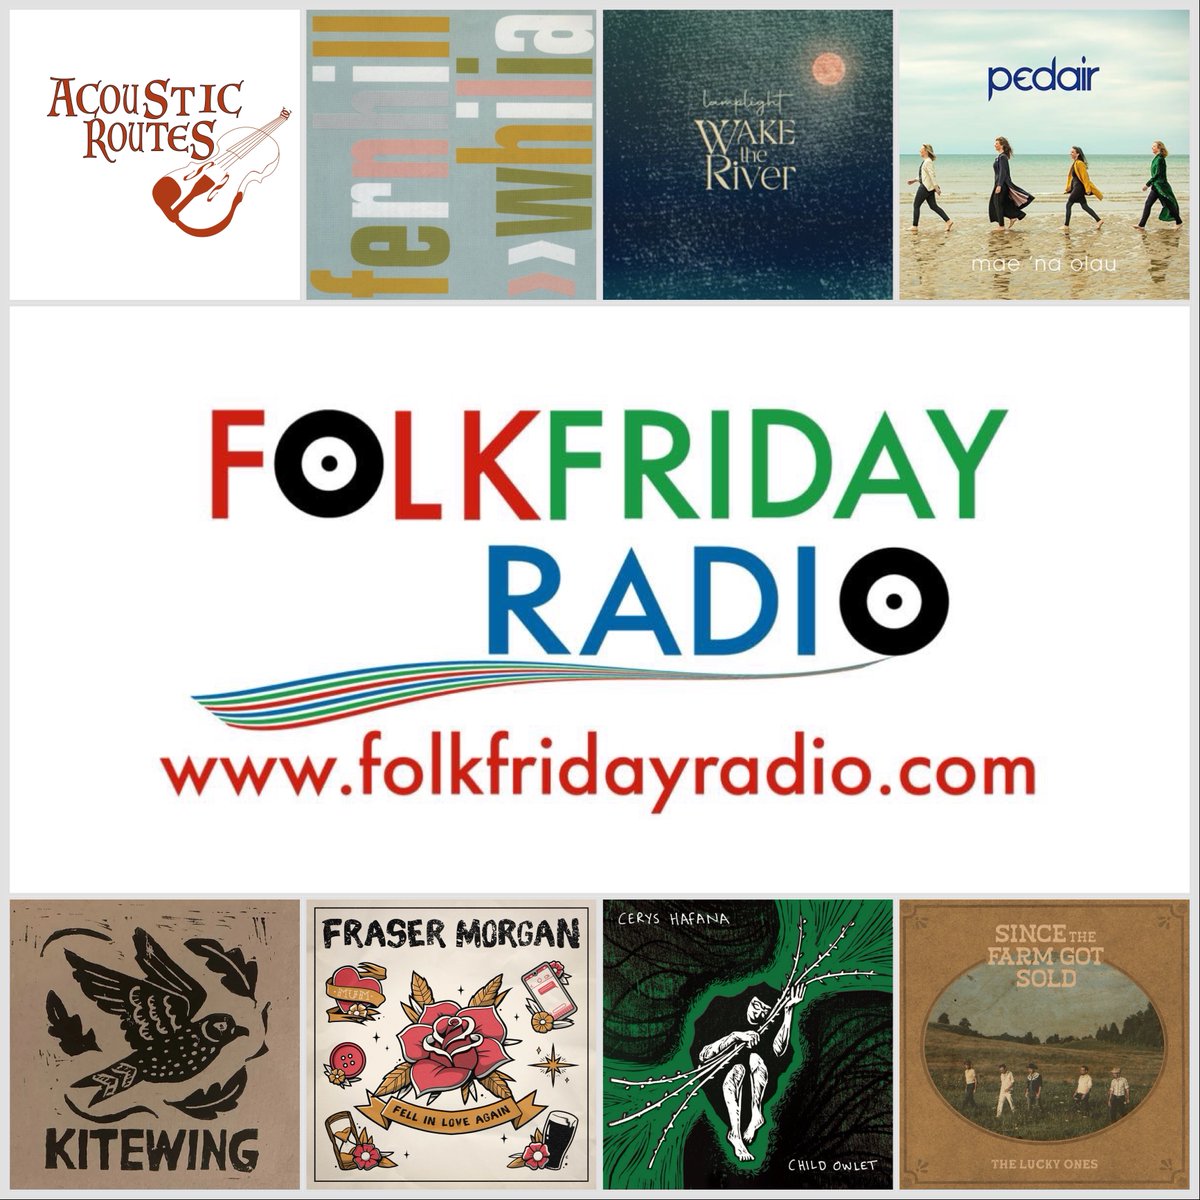 Coming up in @AcousticRoutes show 481 11pm 🏴󠁧󠁢󠁷󠁬󠁳󠁿🇬🇧time Friday on folkfridayradio.com Featured album from #Kitewing Tracks from @fernhillmusic @waketheriver @andywhite_music @FilkinsDrift @CerysHafana @Bluebyrdband @FraserMorganUK @CosmoGuitar @Pedair4 and more.